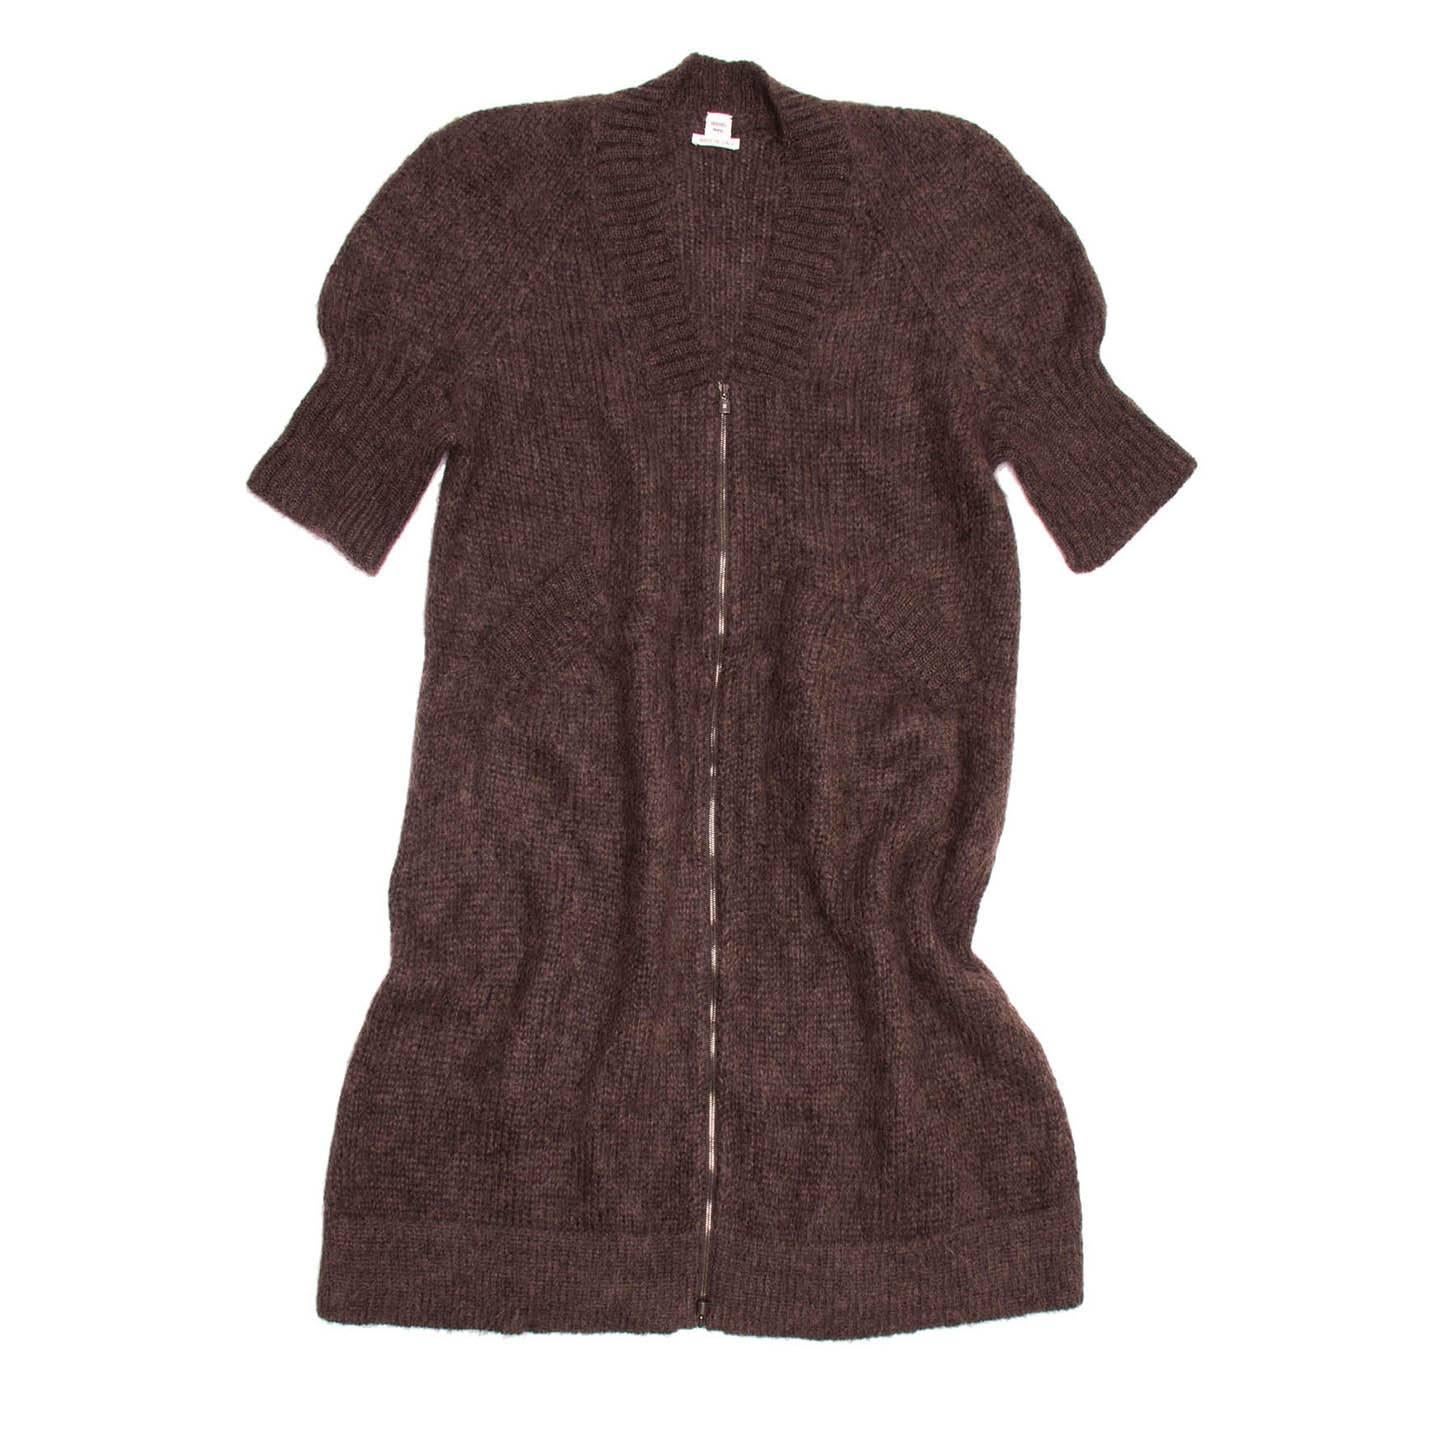 Chocolate brown warm angora knit long top/dress with short cuffed sleeves. The close V-neck is ribbed and elegant to match the little slash pockets at waist and the cuffs. An open-ended visible charcoal grey metallic zipper fastens the